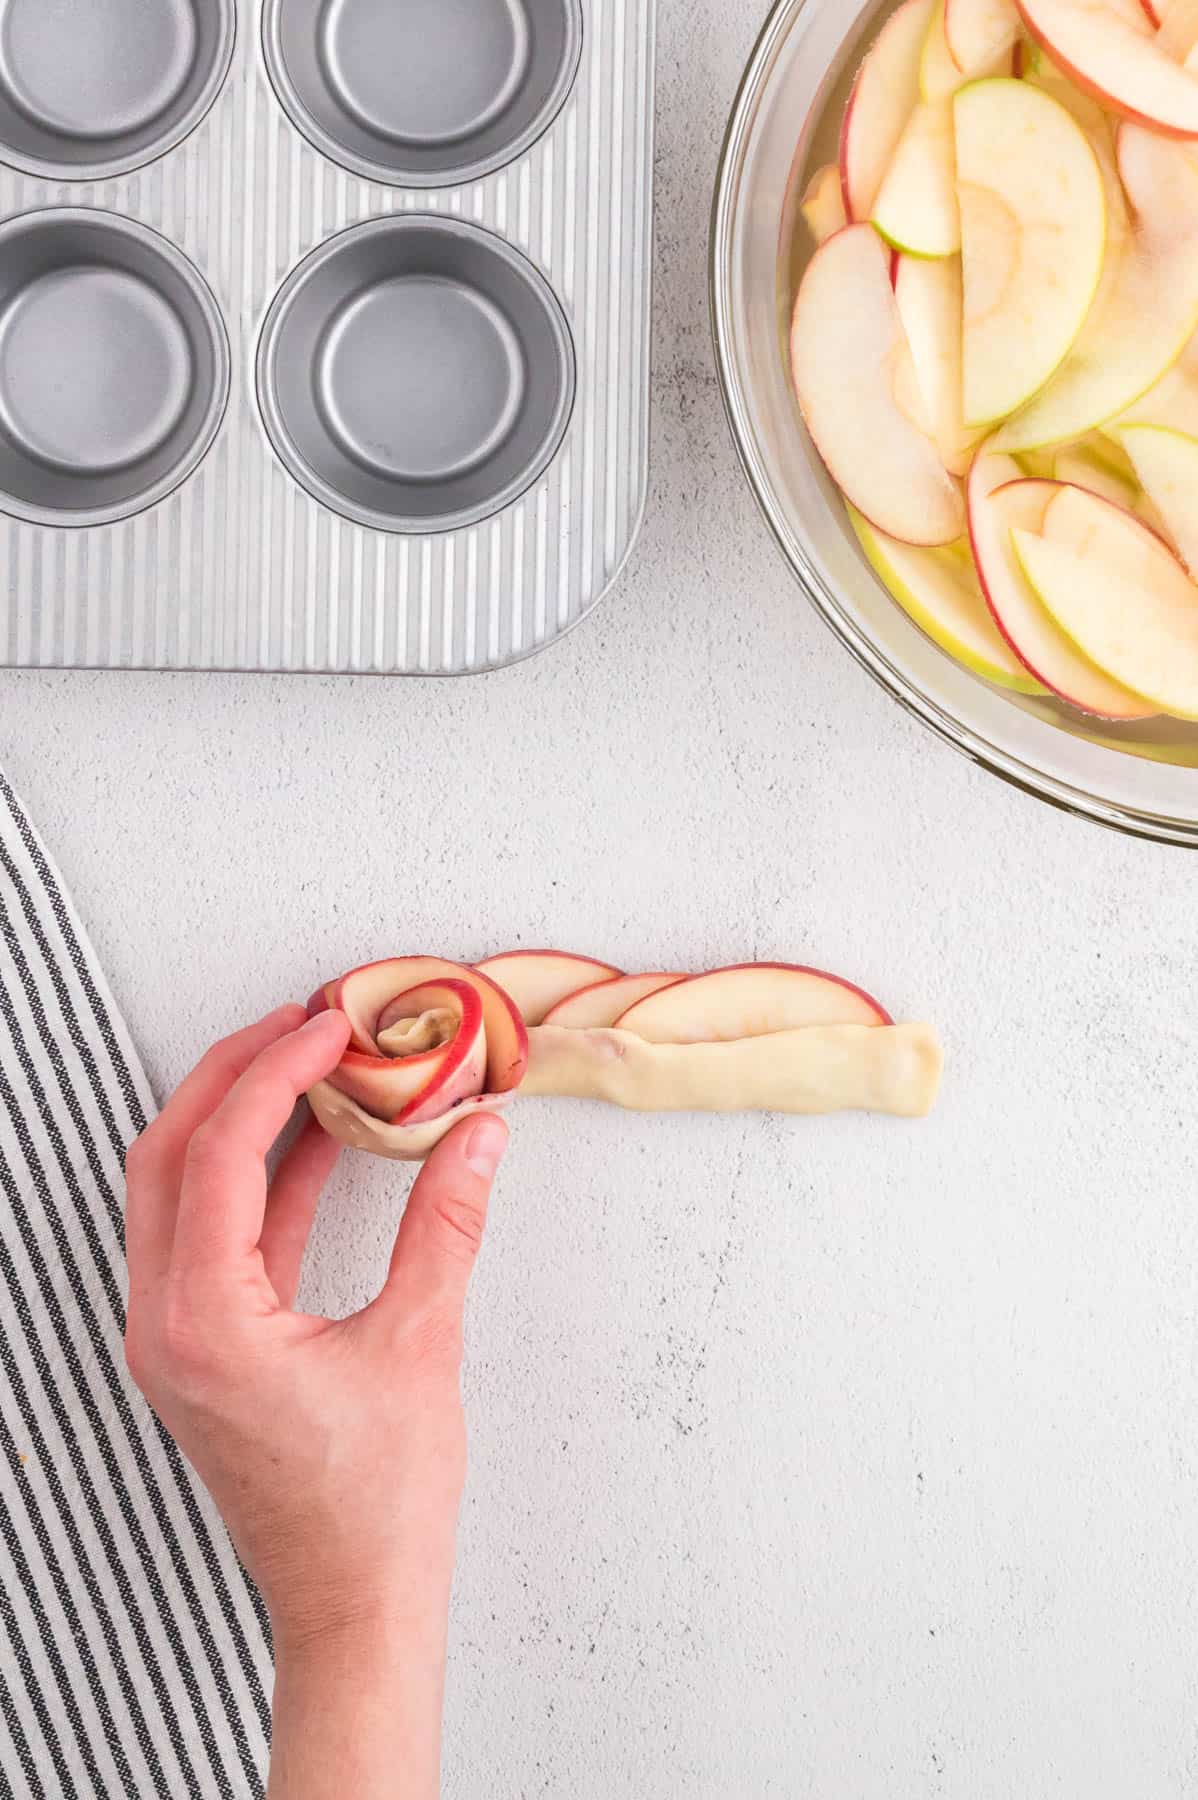 Rolling up apples and puff pastry into a flower shape.